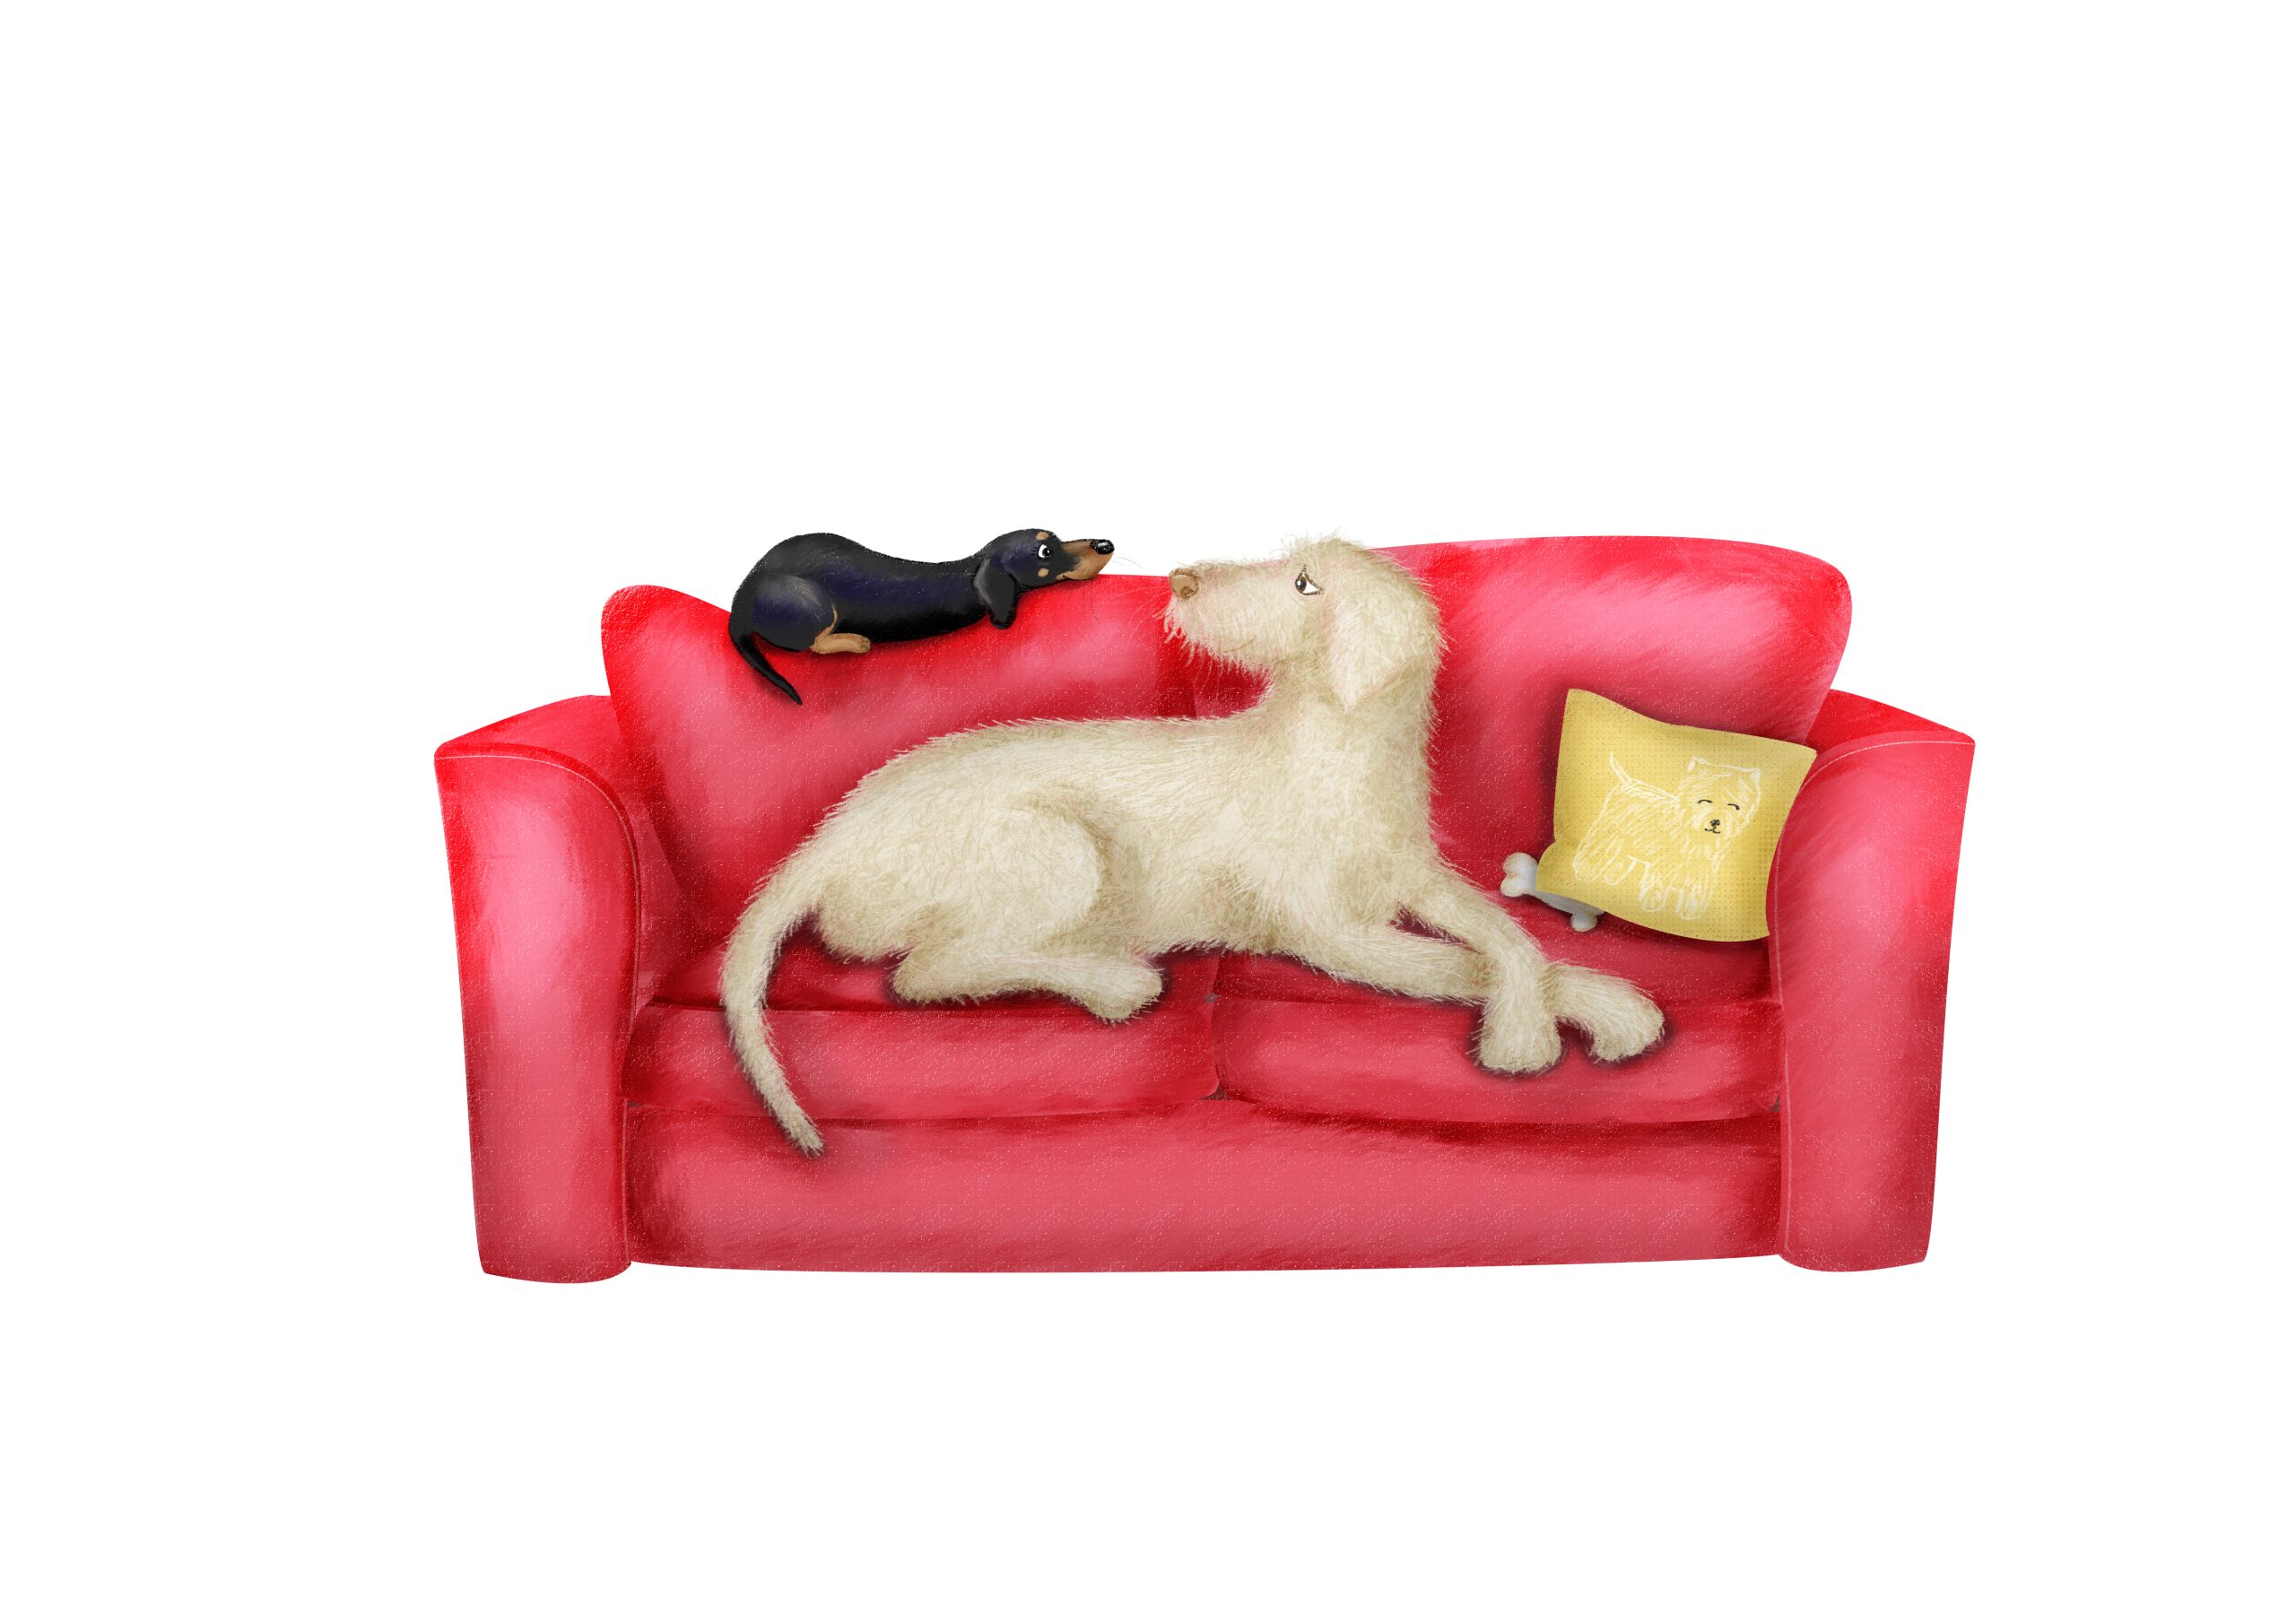 Drawing of a large white lurcher and tiny dachshund on a red sofa